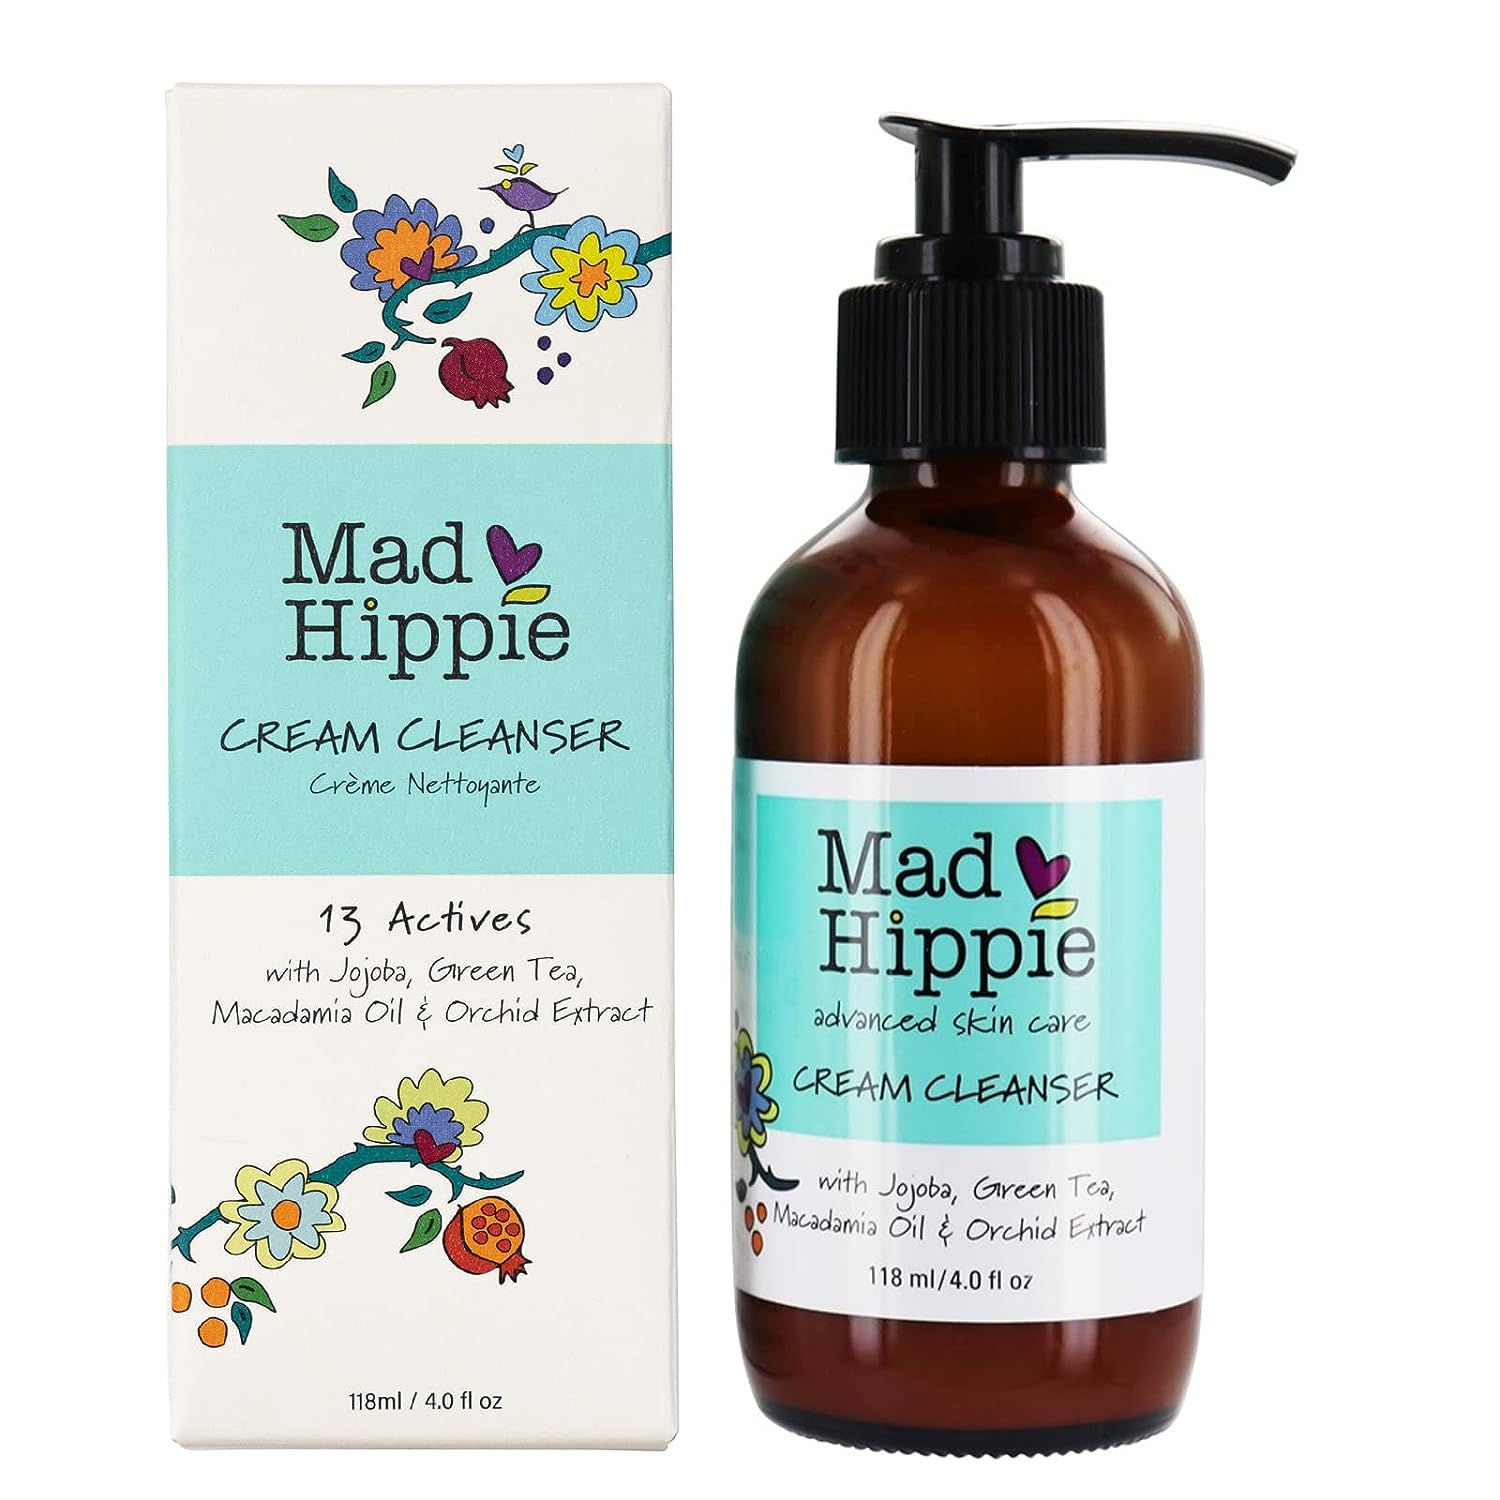 Mad Hippie Cream Cleanser - Hydrating Facial Cleanser with Jojoba Oil, Green Tea, Orchid Extract, and Hyaluronic Acid, Gentle Face Cleanser for Women/Men with Dry, Sensitive Skin, 4